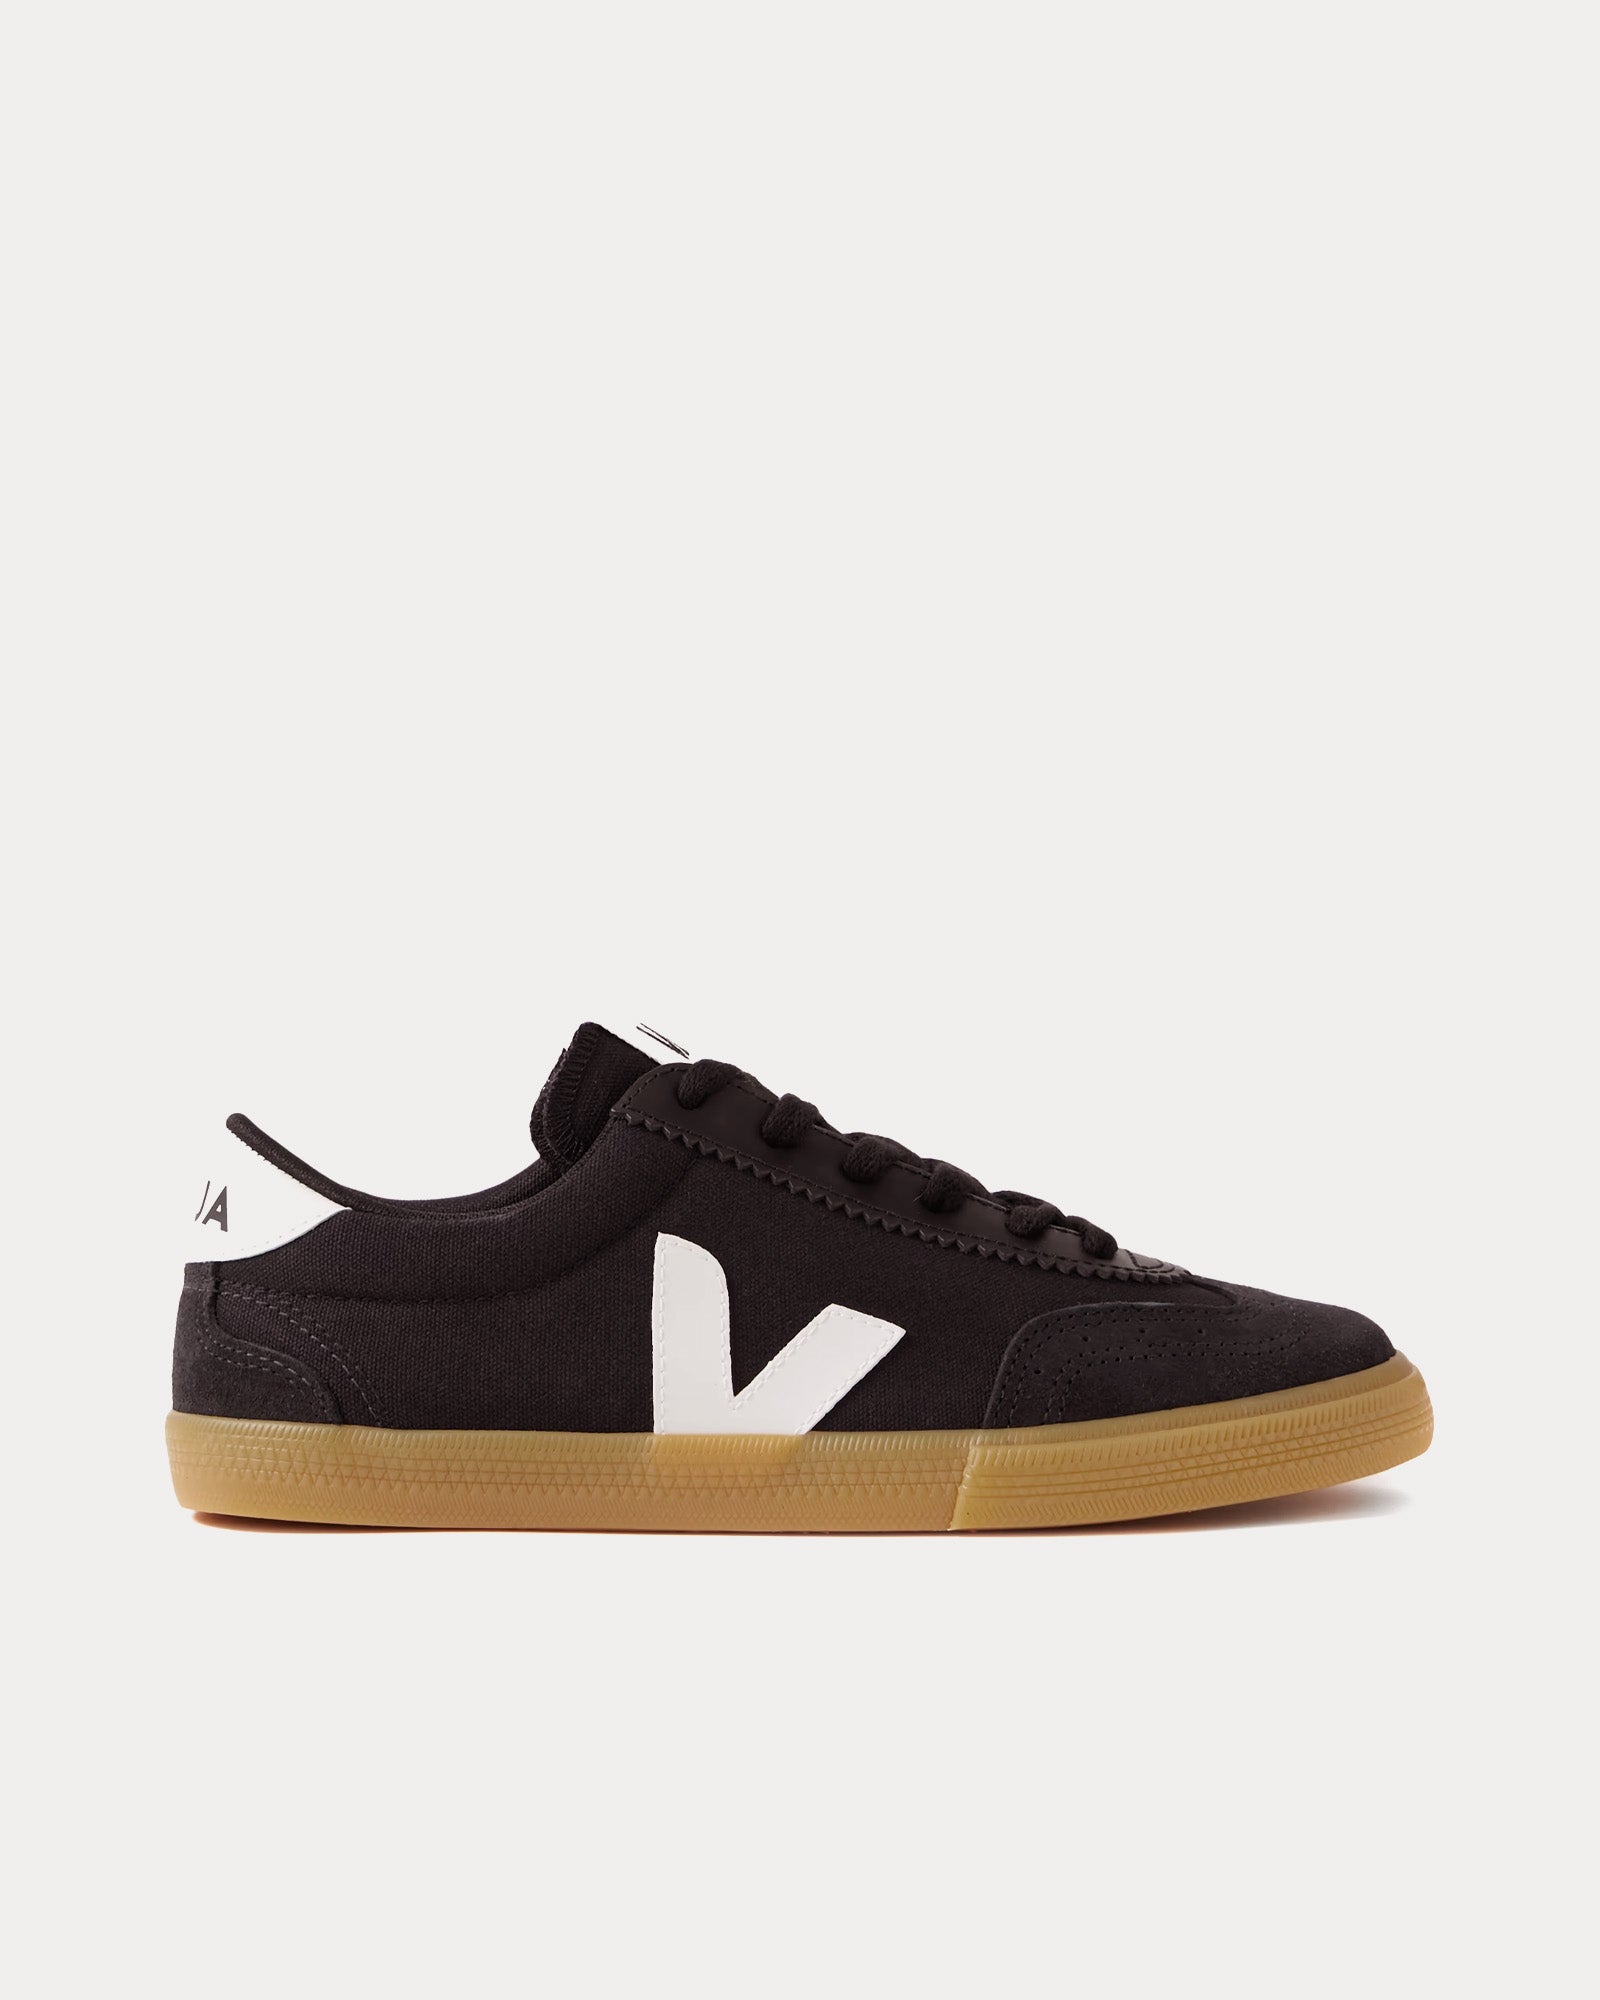 Veja - Volley Canvas Black / White / Natural Low Top Sneakers